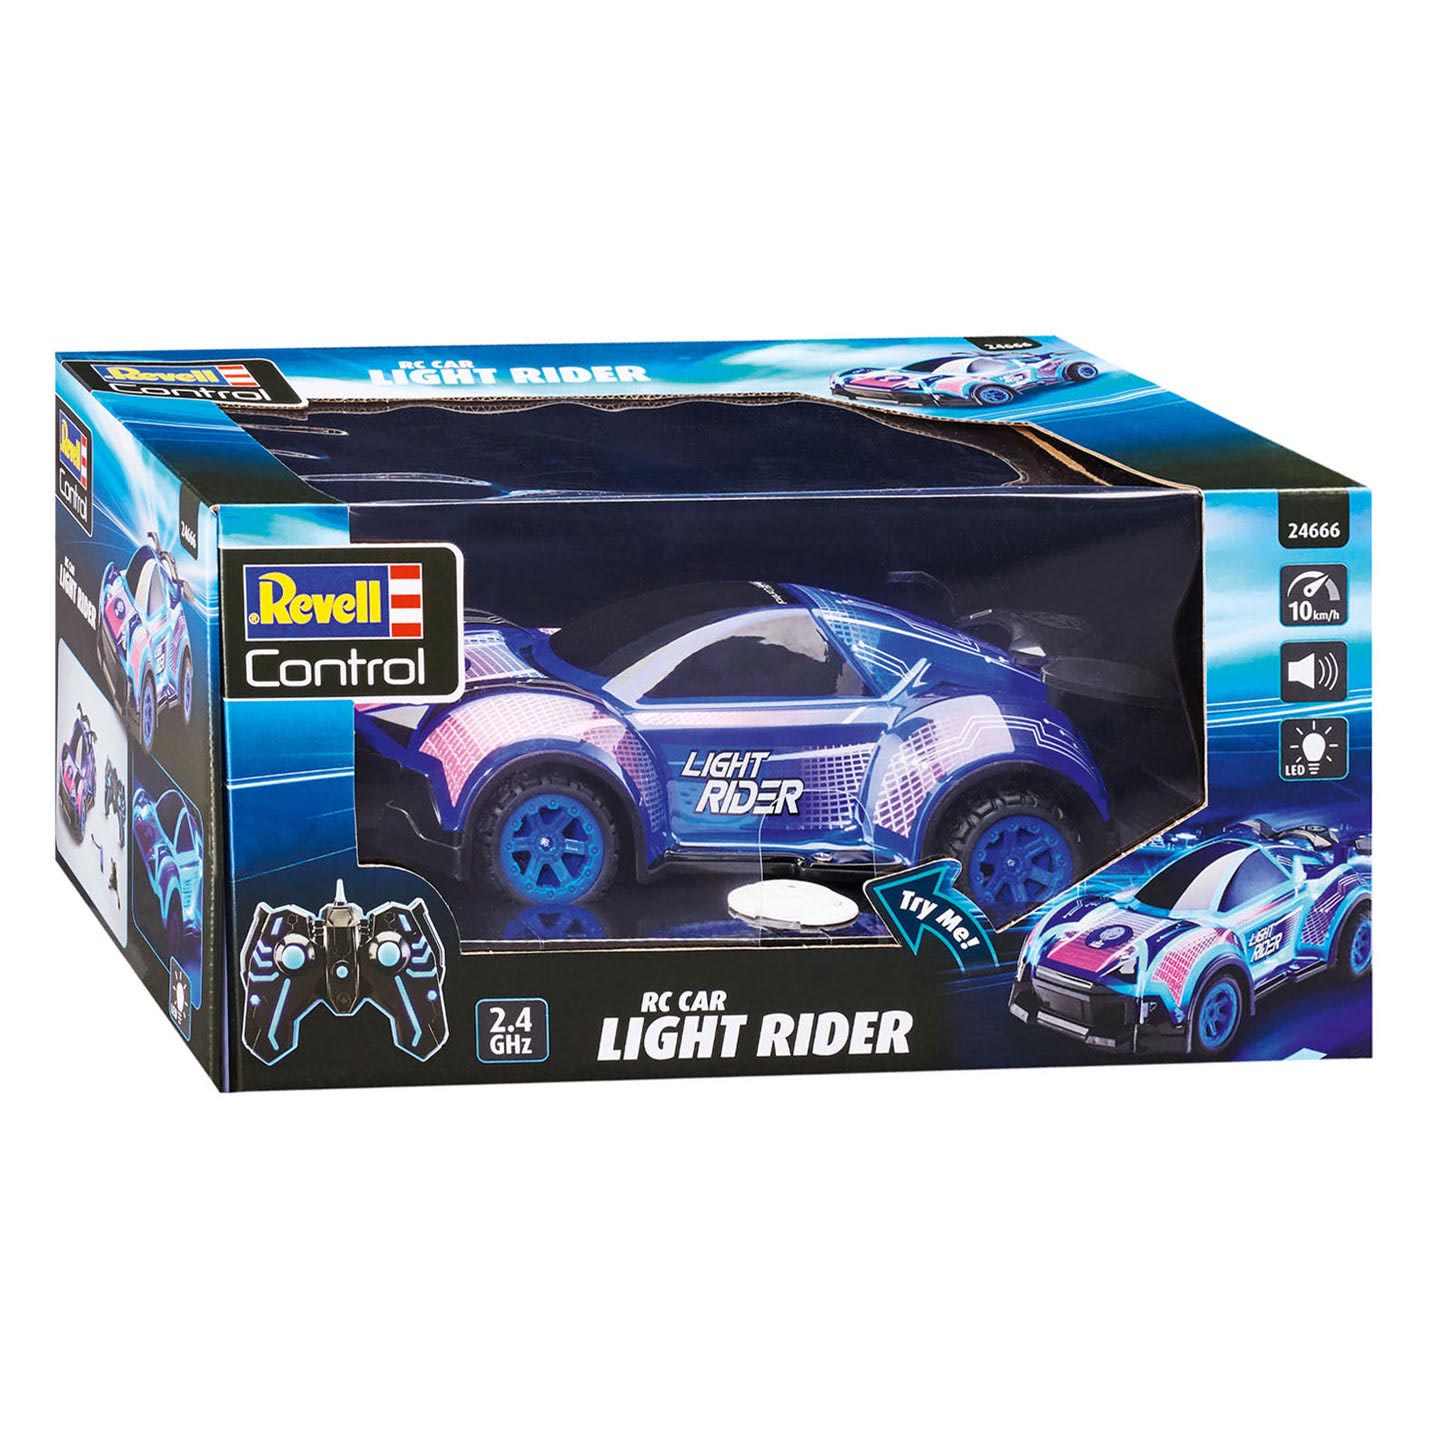 duizend thema commentaar Revell RC Controlled Car - Light Rider | Thimble Toys